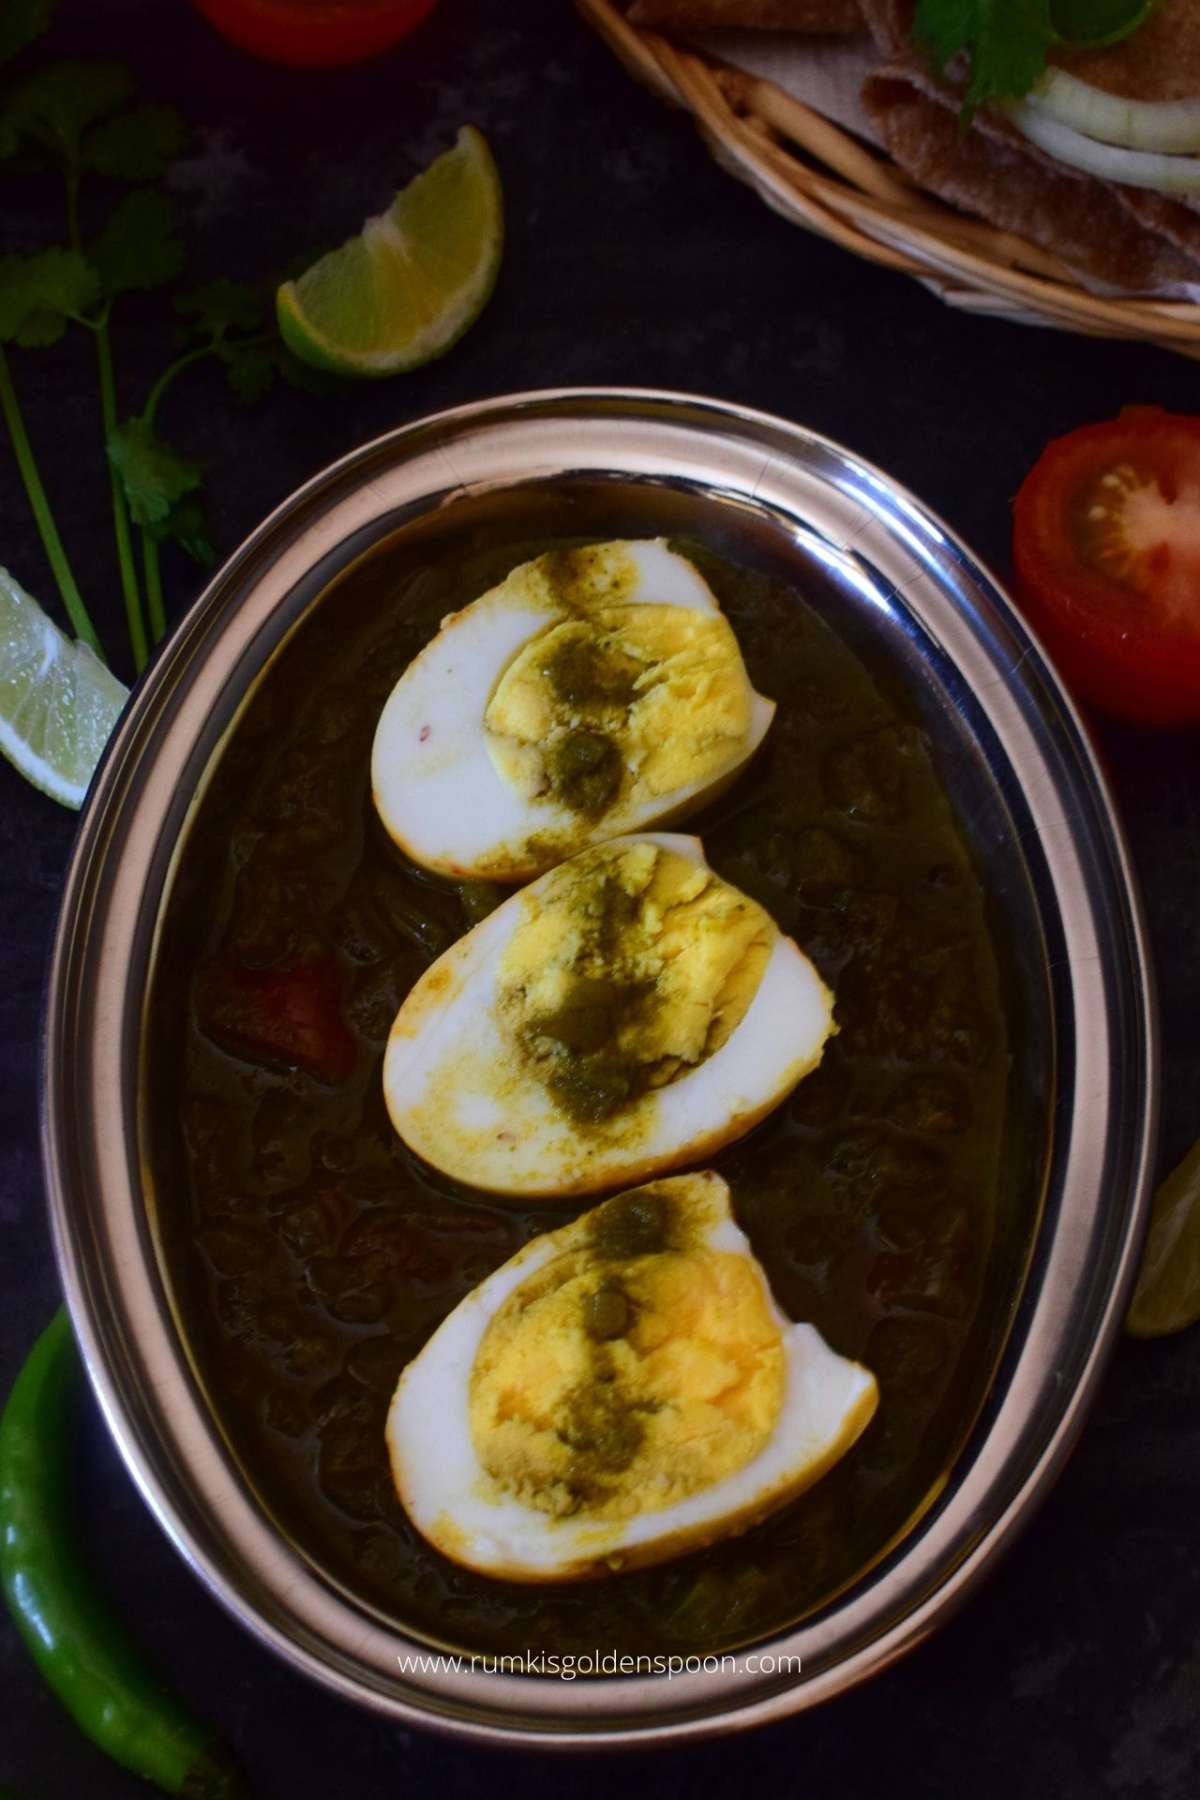 Coriander egg curry, Dhaniya anda curry, egg curry with coriander leaves, hariyali egg curry, hariyali anda curry, egg curry recipe, anda curry, anda curry recipe, recipe for anda curry, egg curry for rice, egg curry for chapathi, south indian egg curry recipe, egg curry recipe for rice, egg curry recipe easy, indian egg curry, indian egg curry recipe, north indian egg curry recipe, egg curry indian style, best indian egg curry recipe, how to make egg curry, Rumki's Golden Spoon